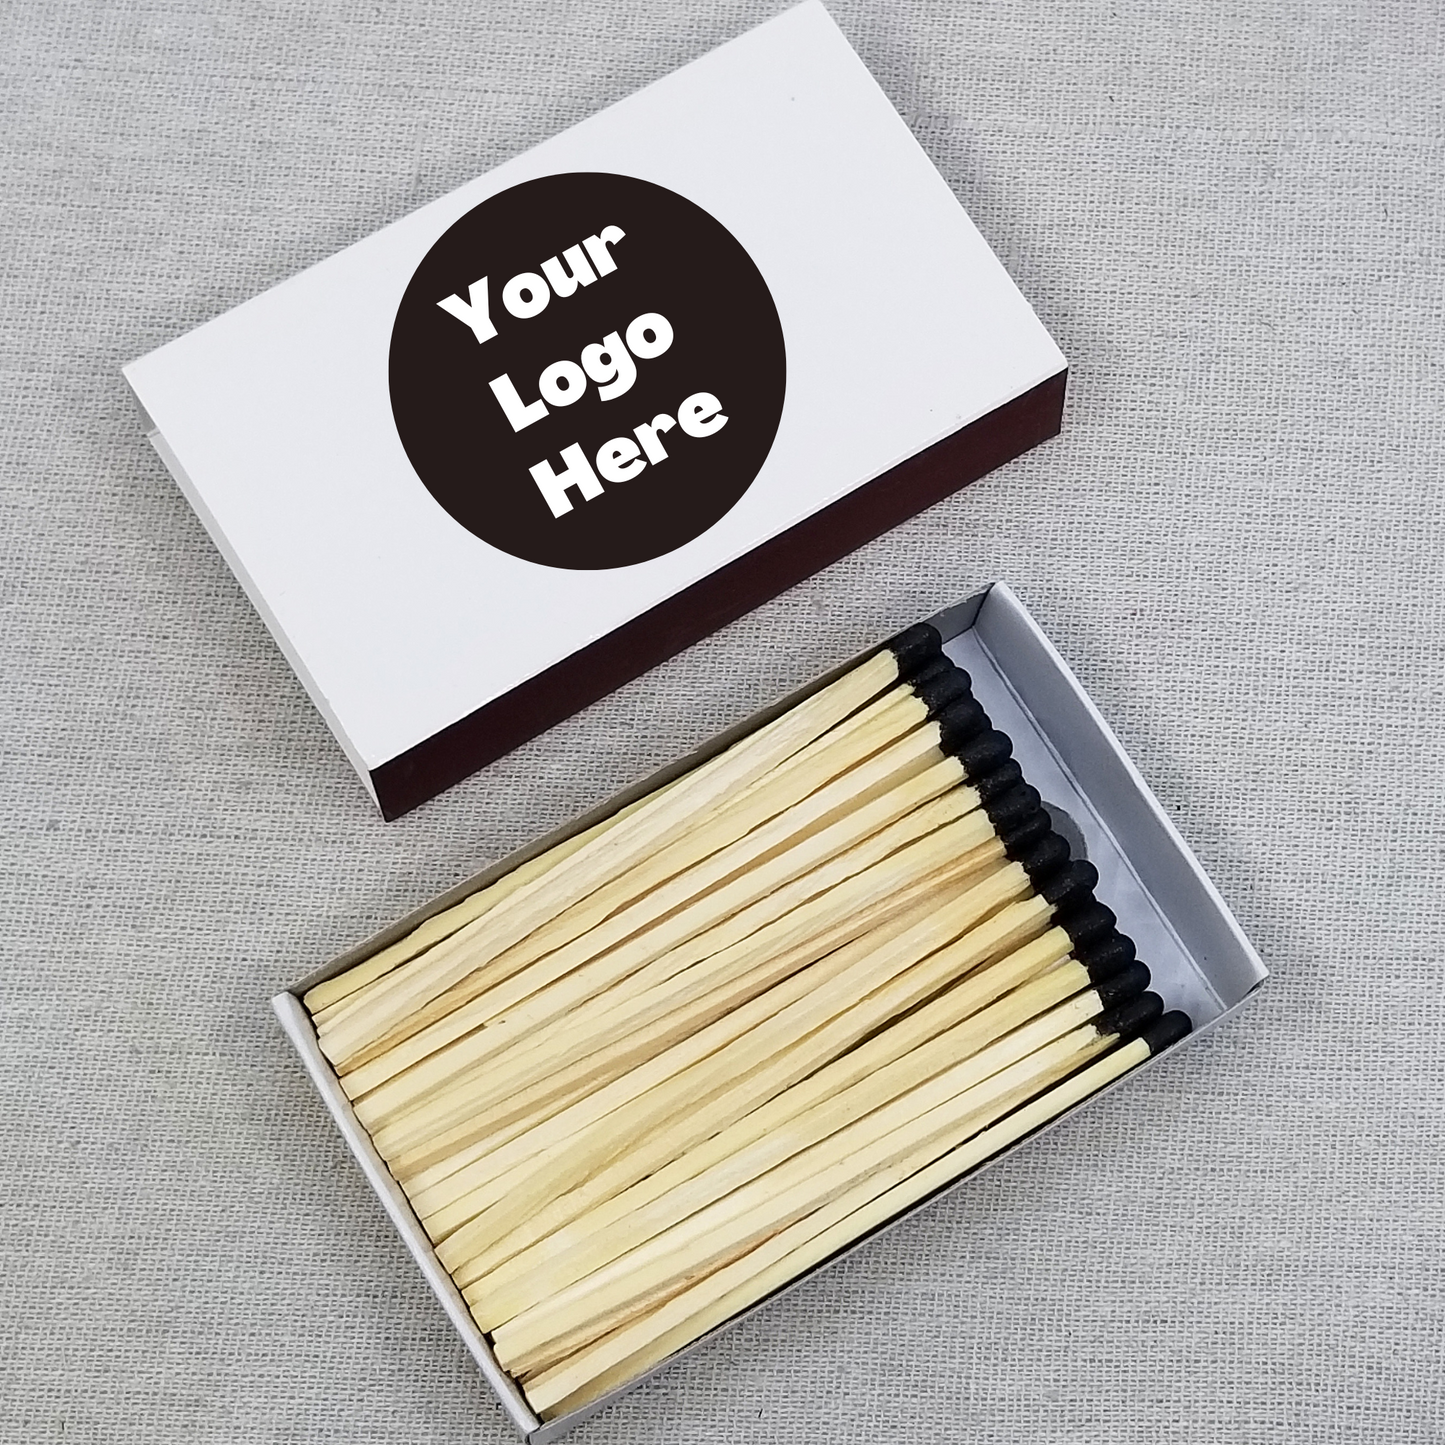 Customizable 4" Matchsticks and Matchboxes | 1,000 Boxes | 10 Tip Colors | Add Your Logo or Personal Design | Backorder 90-120 Days